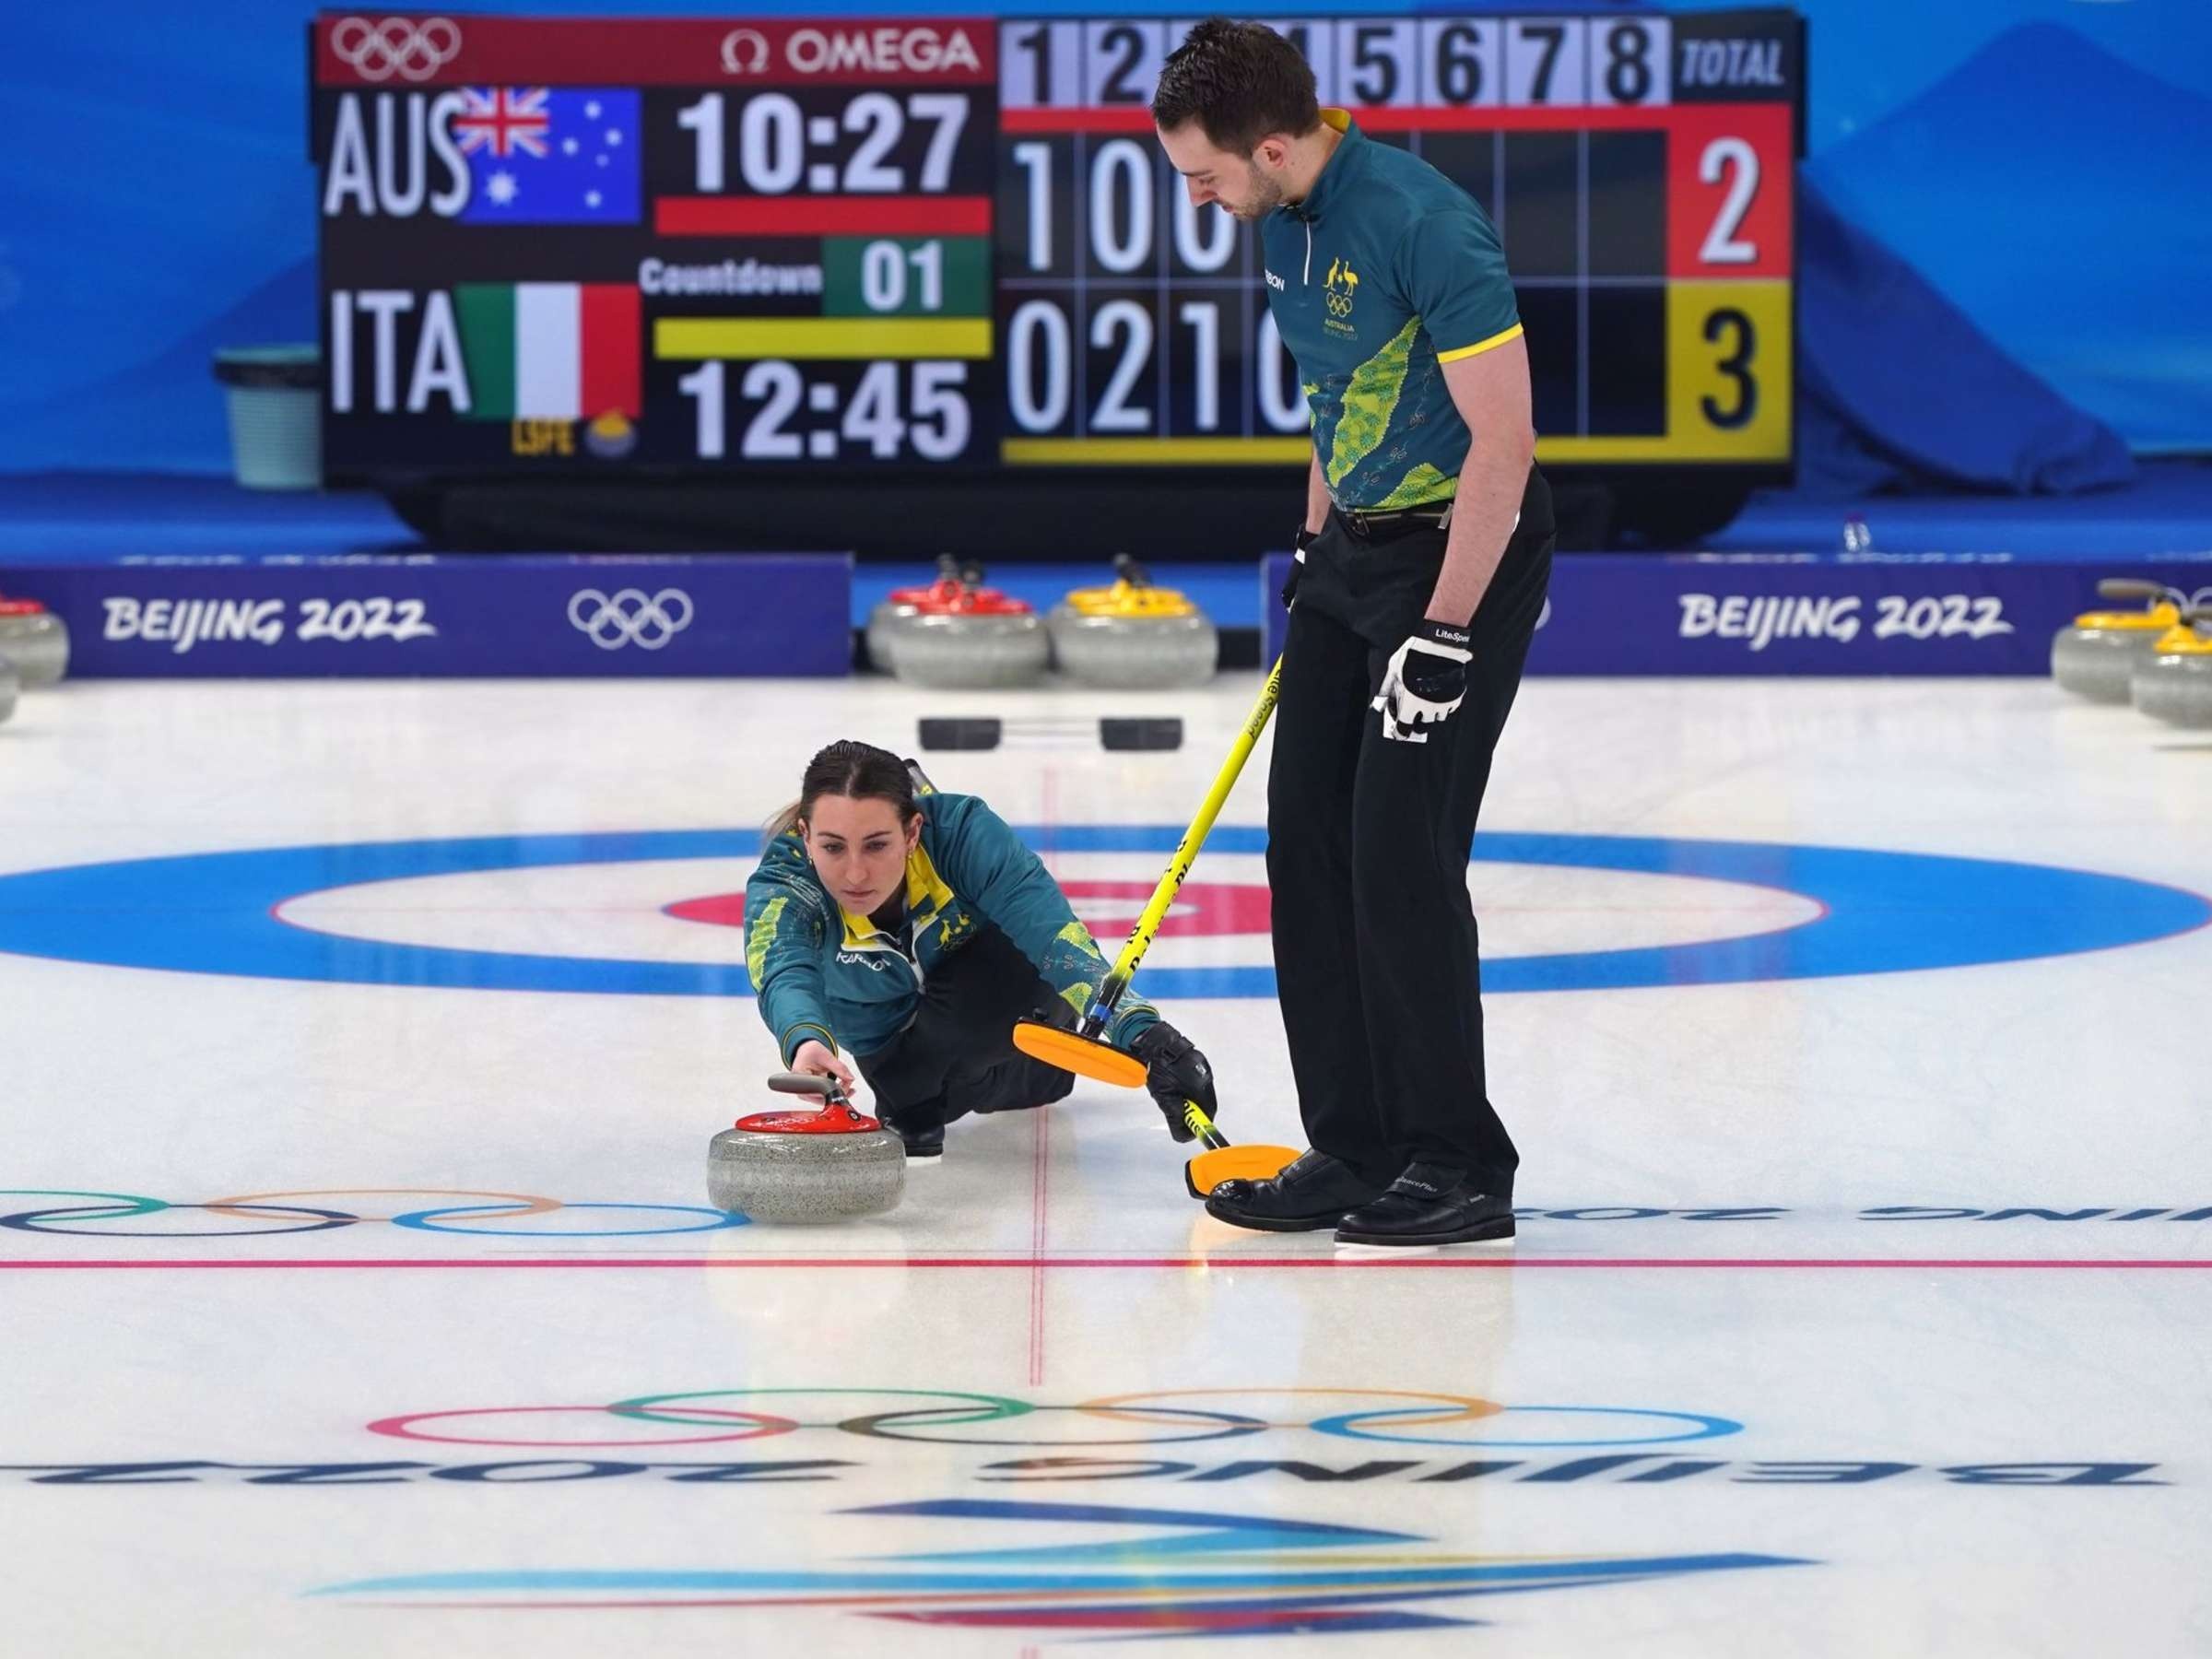 Positive tests, Australian curling duo, Winter sports, Competition eligibility, 2400x1800 HD Desktop